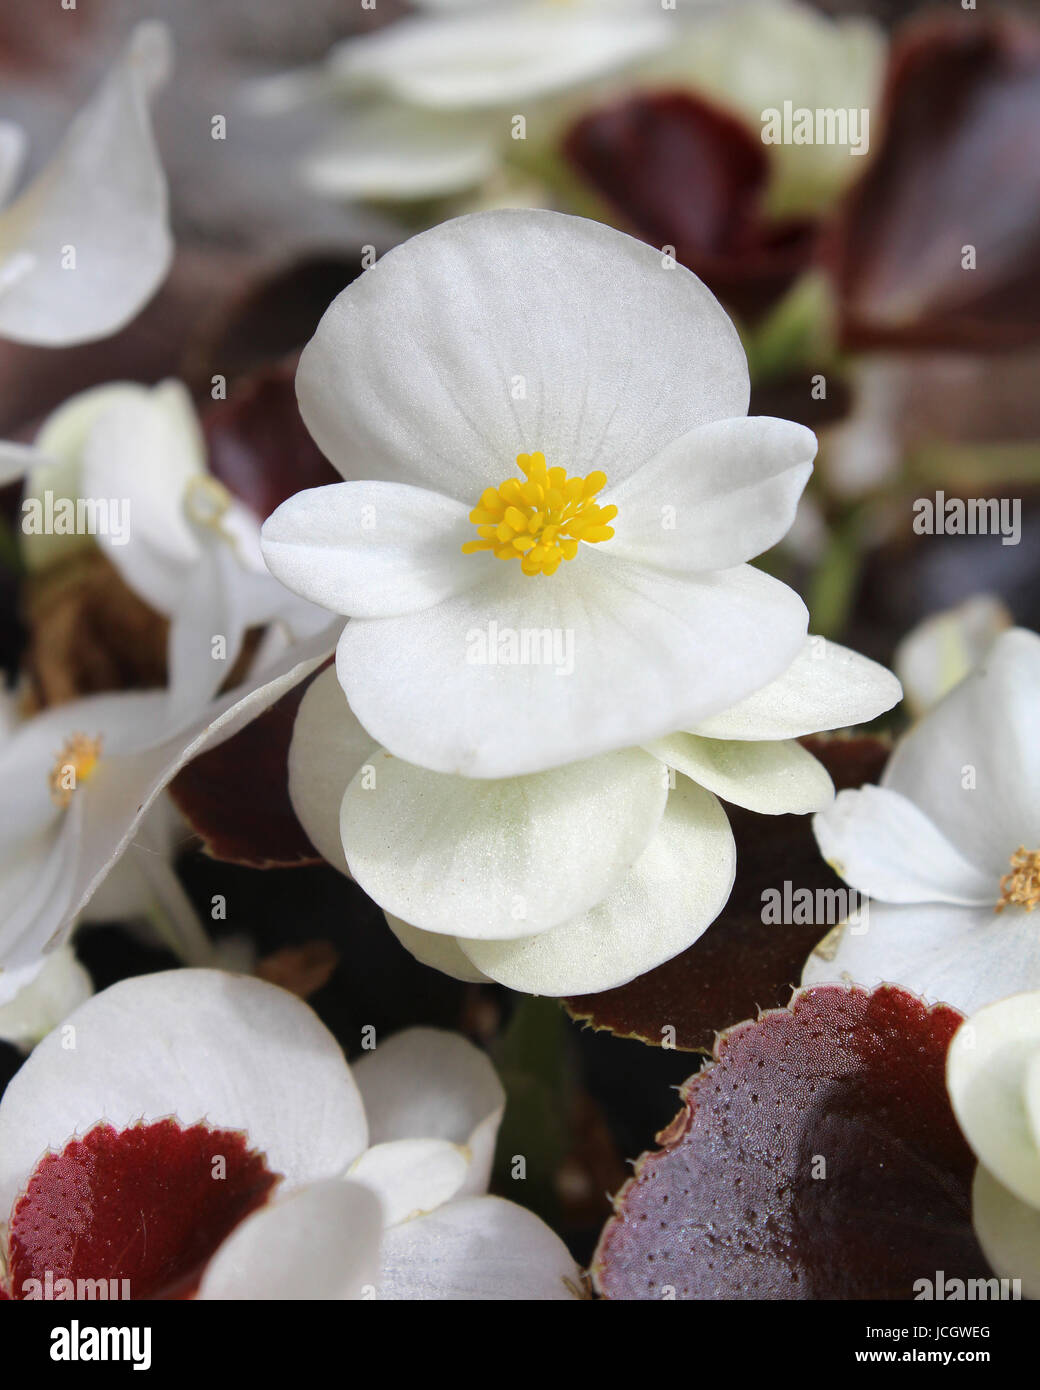 The fresh white flowers of summer bedding plant Begonia semperflorens, also known as wax begonia. Stock Photo